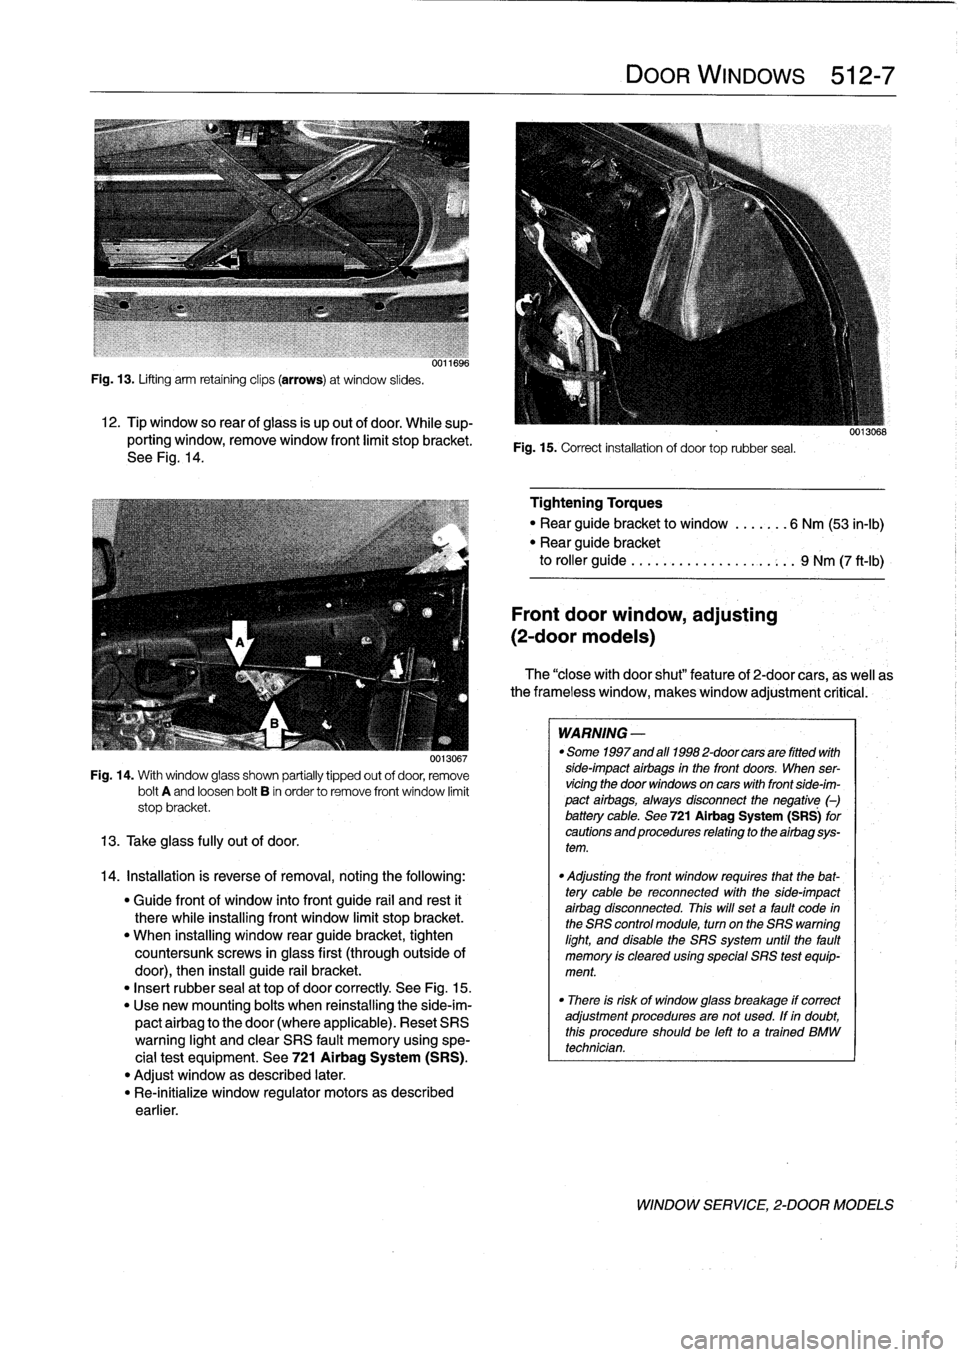 BMW 325i 1996 E36 Workshop Manual 
Fig
.
13
.
Lifting
arm
retaining
clips
(arrows)
at
window
slides
.

12
.
Tip
window
so
rear
ofglass
is
up
out
of
door
.
While
sup-
porting
window,
remove
window
front
limit
stopbracket
.
See
Fig
.
14